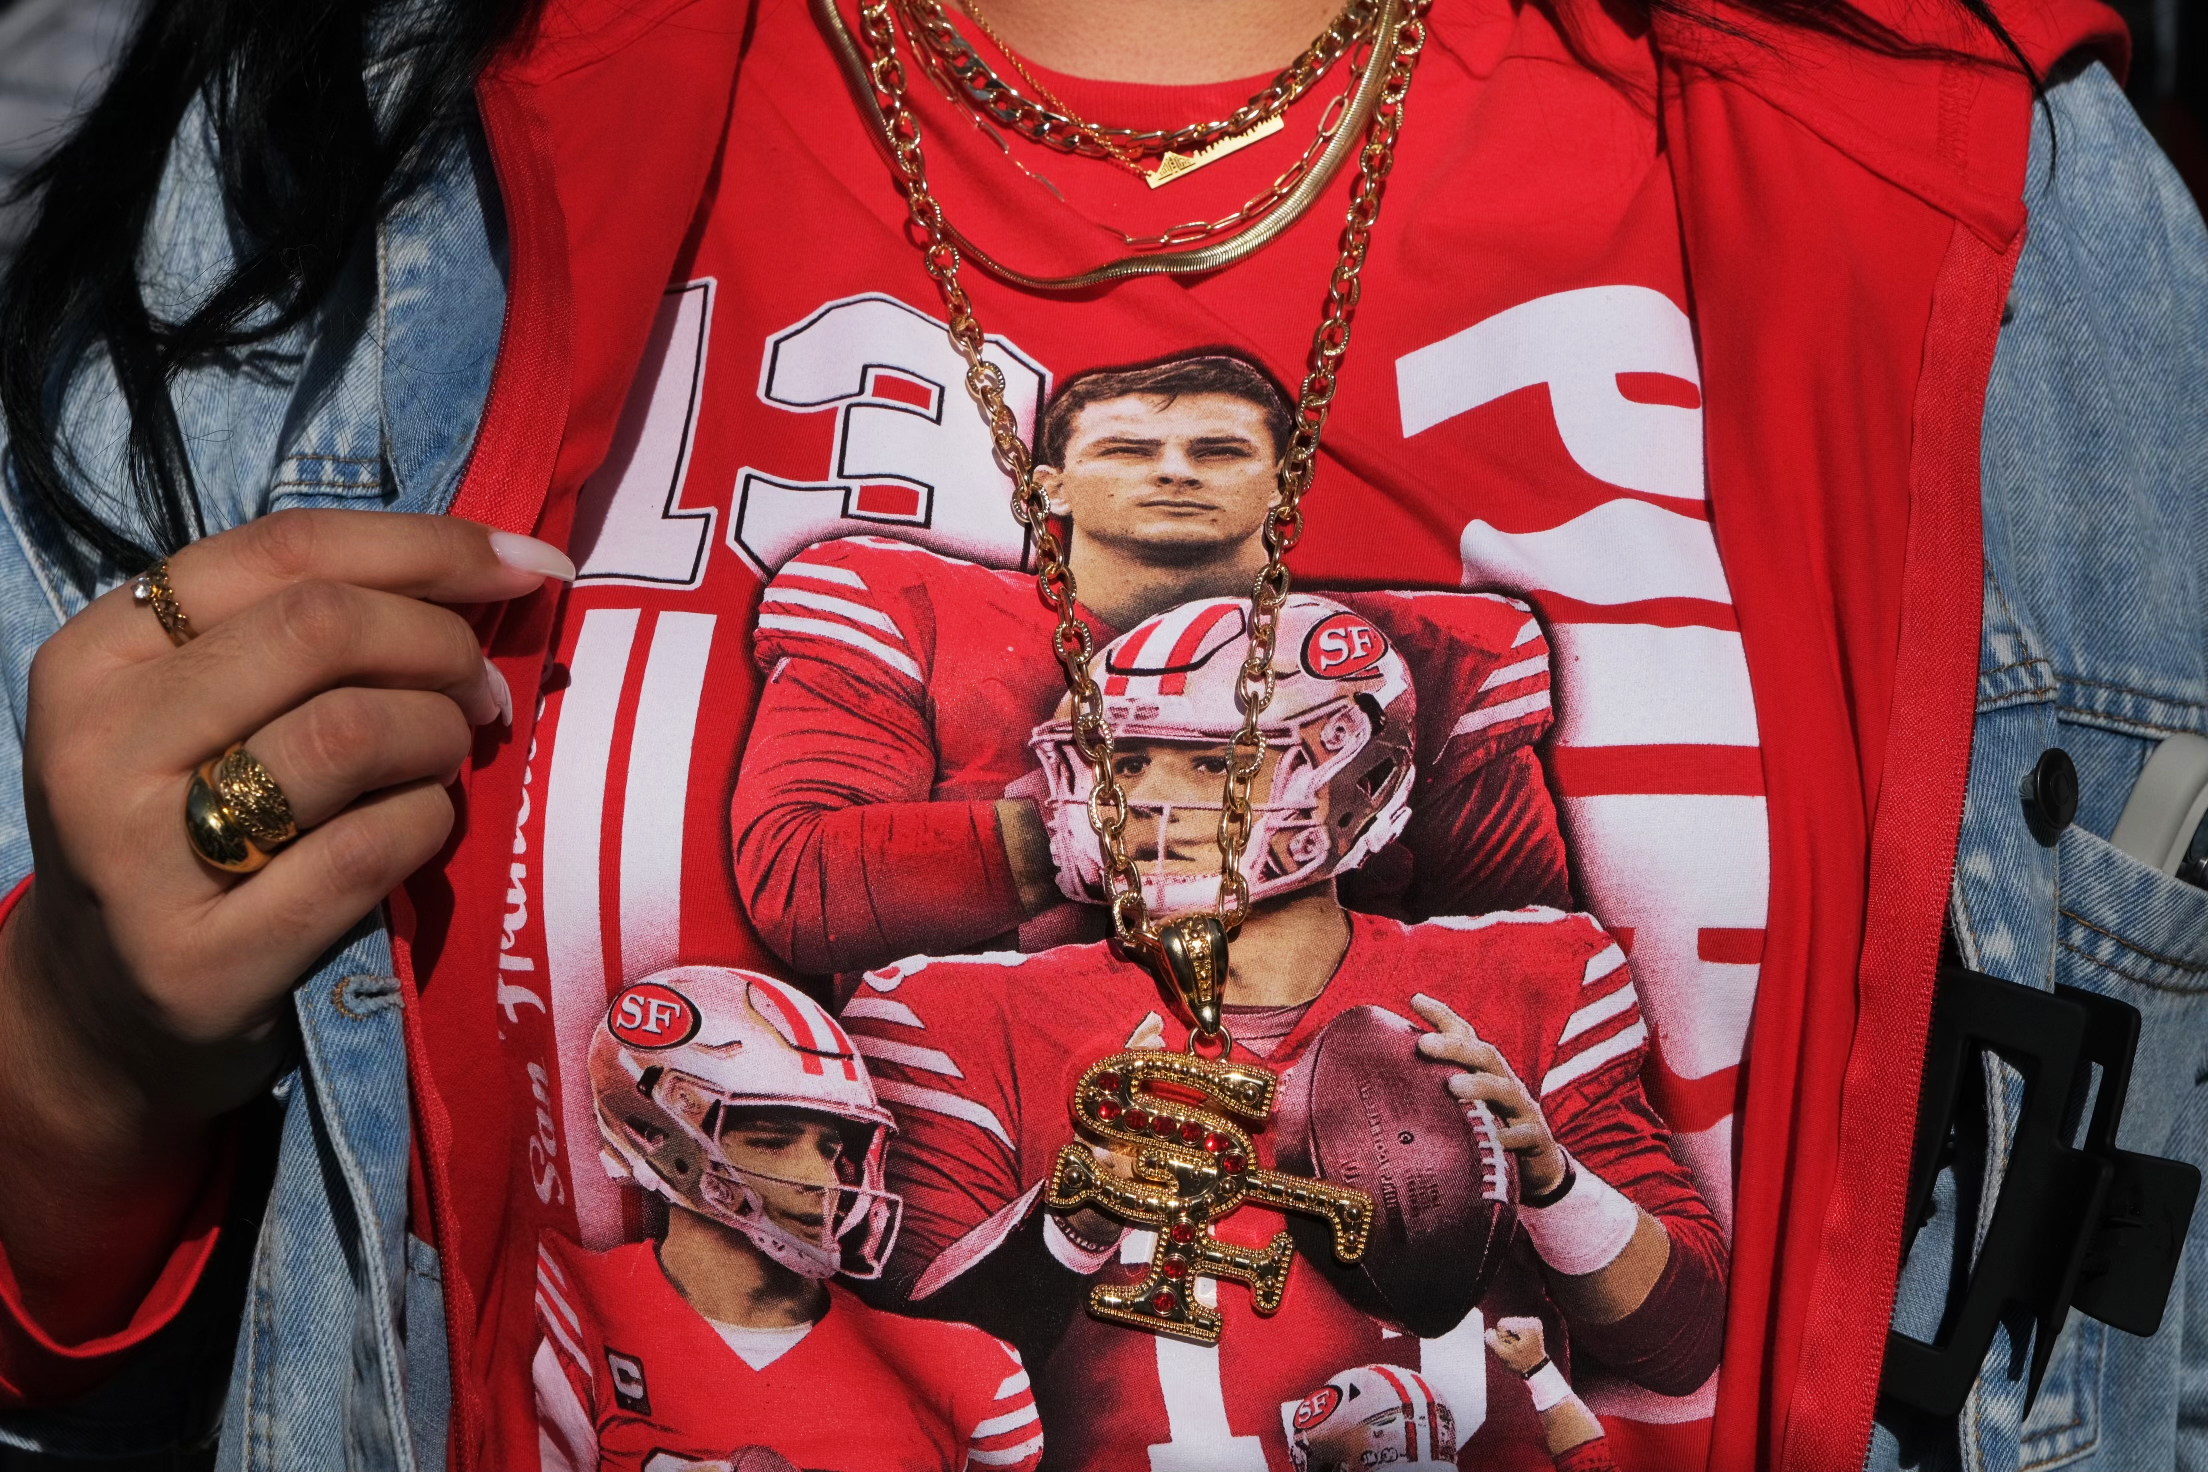 A person is wearing a red T-shirt with printed images of football players and the number 13, layered with a denim jacket and gold jewelry.